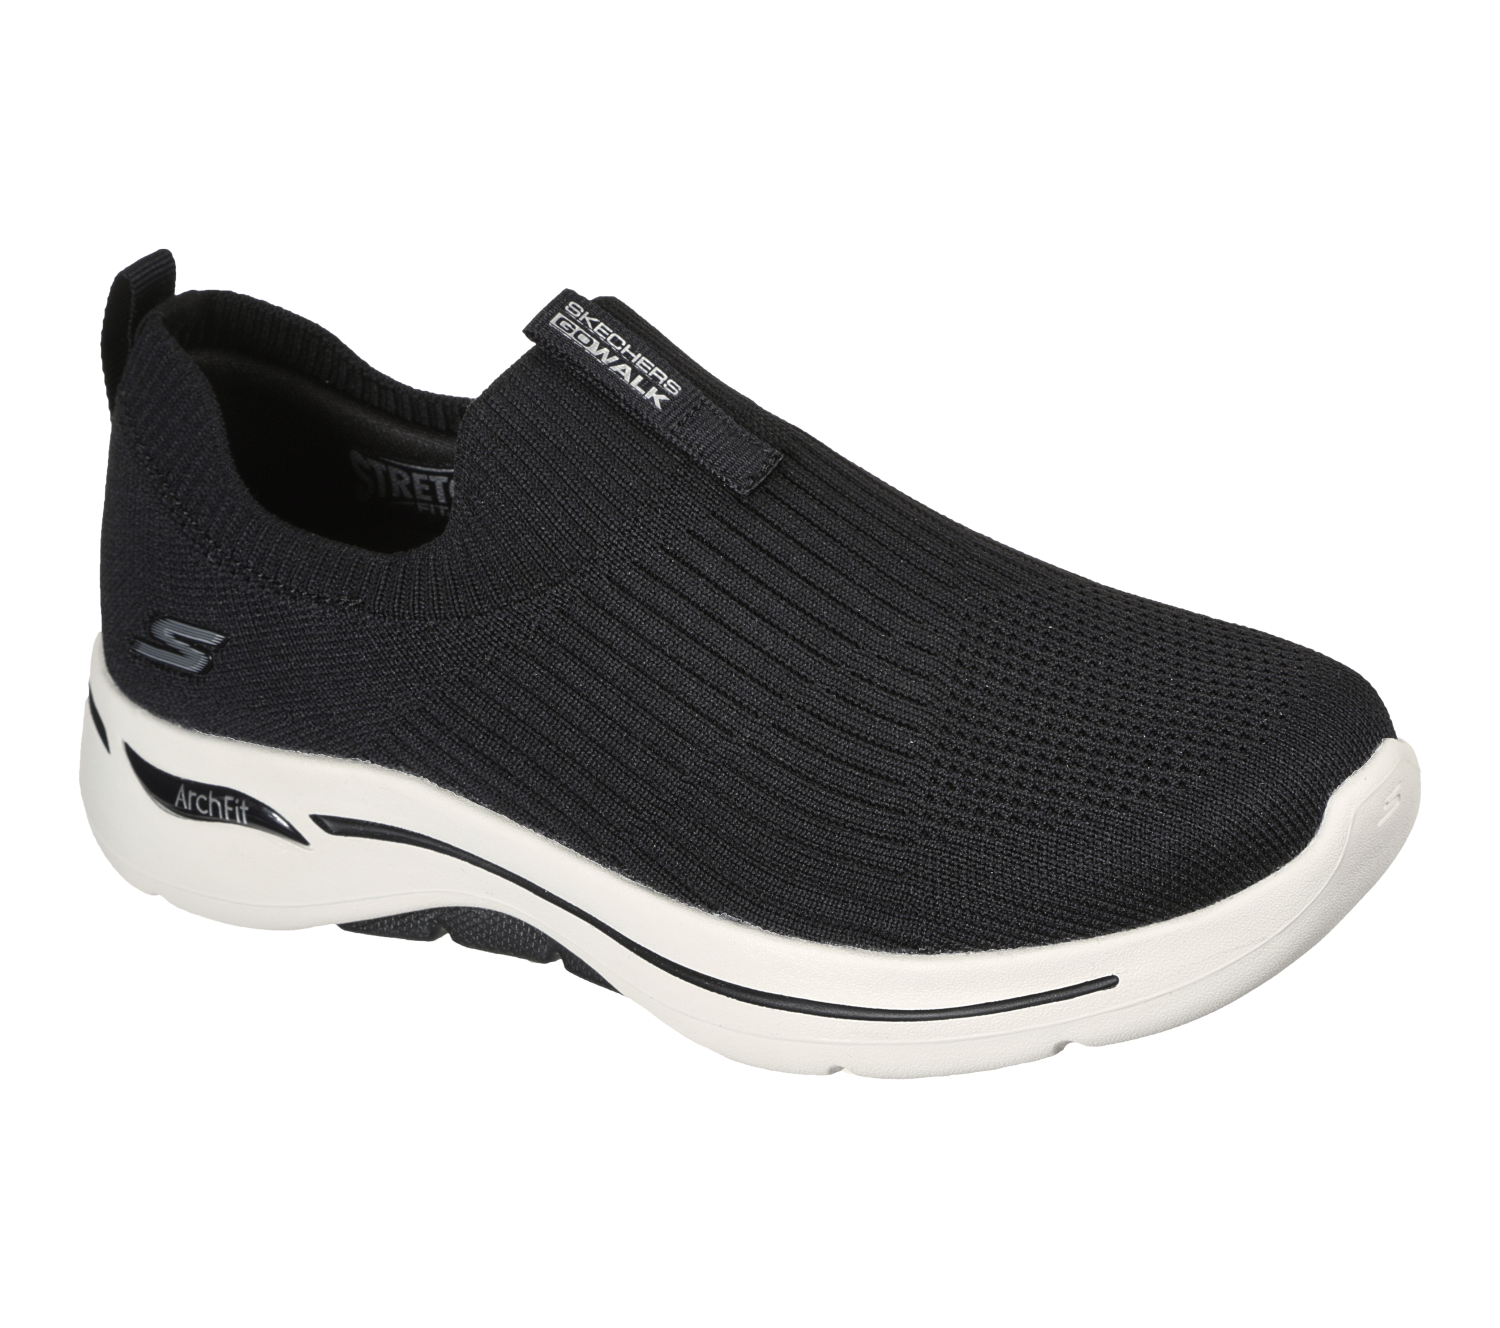 Skechers go walk arch fit - iconic